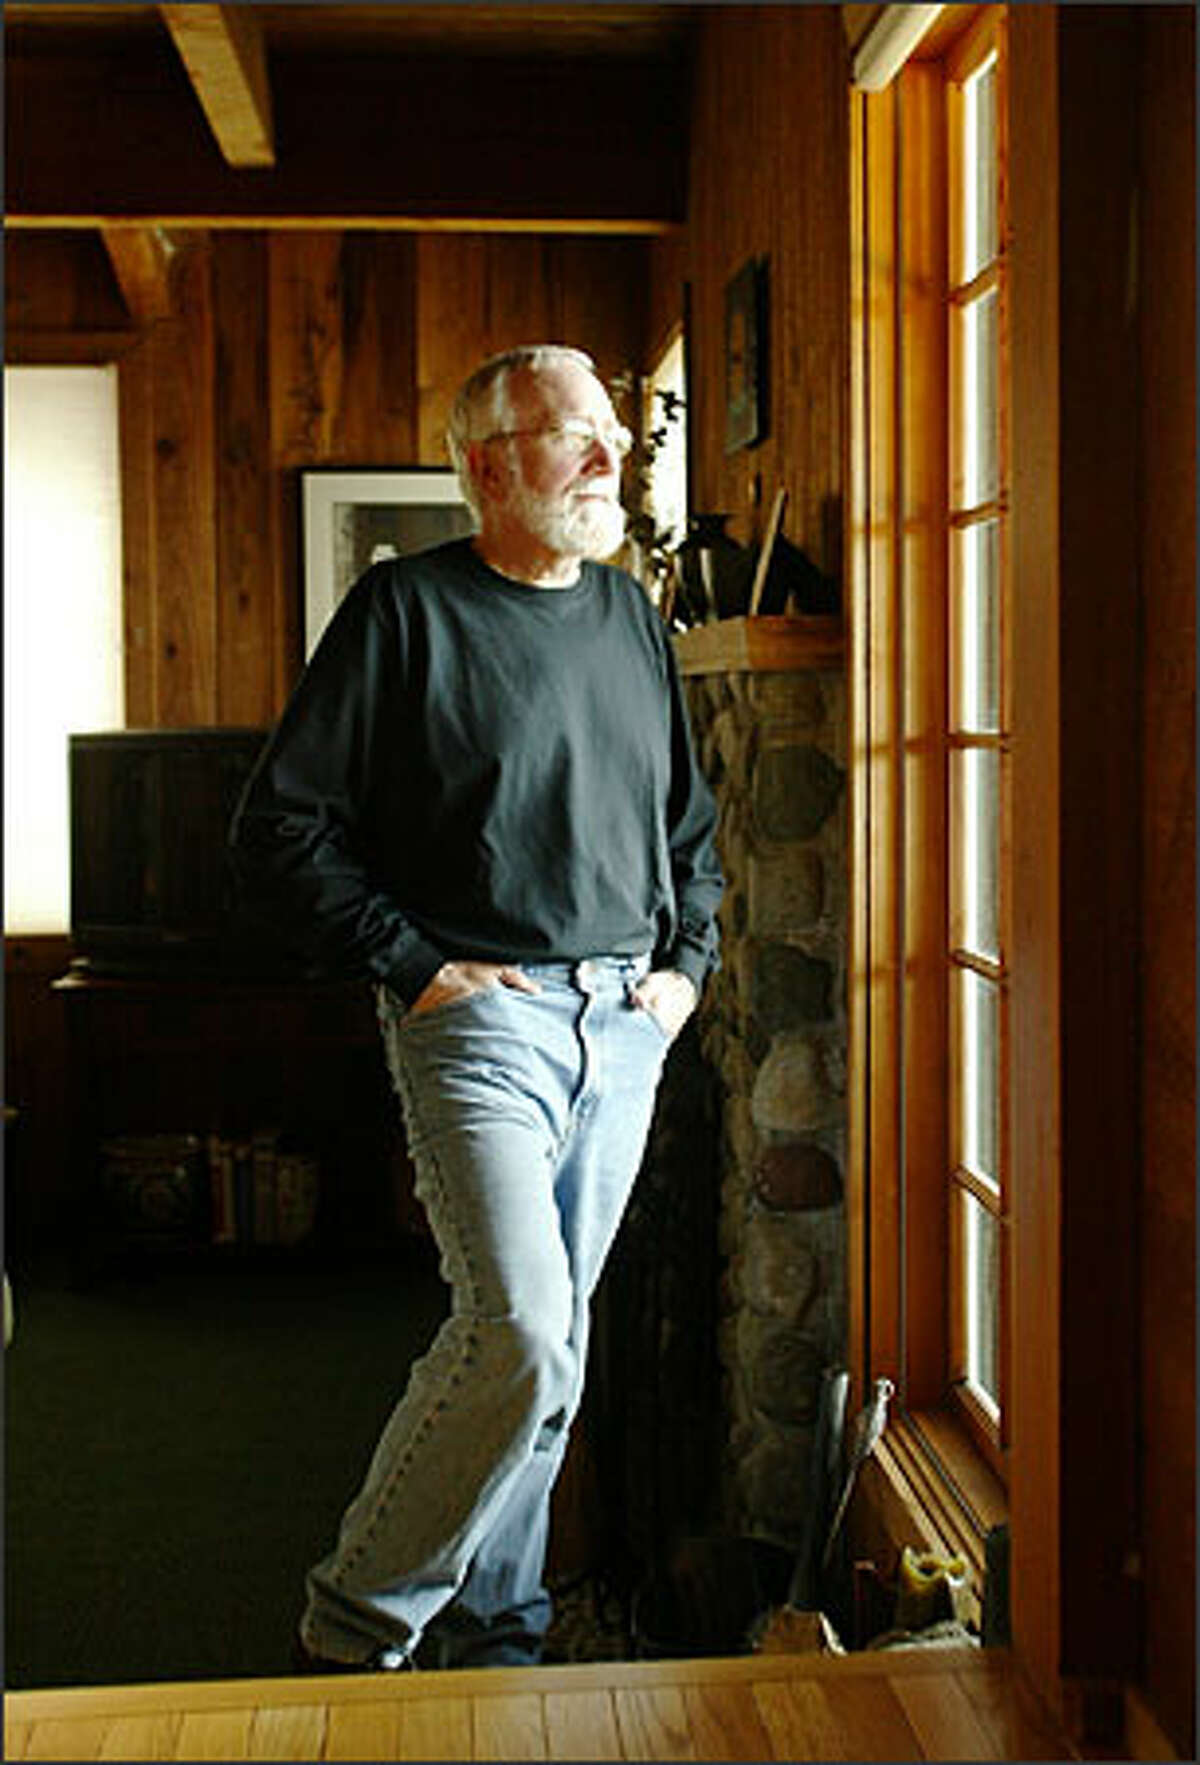 At home on Orcas Island, Norm Stamper is finishing the book he "had to write" after his stormy tenure as Seattle's top cop.